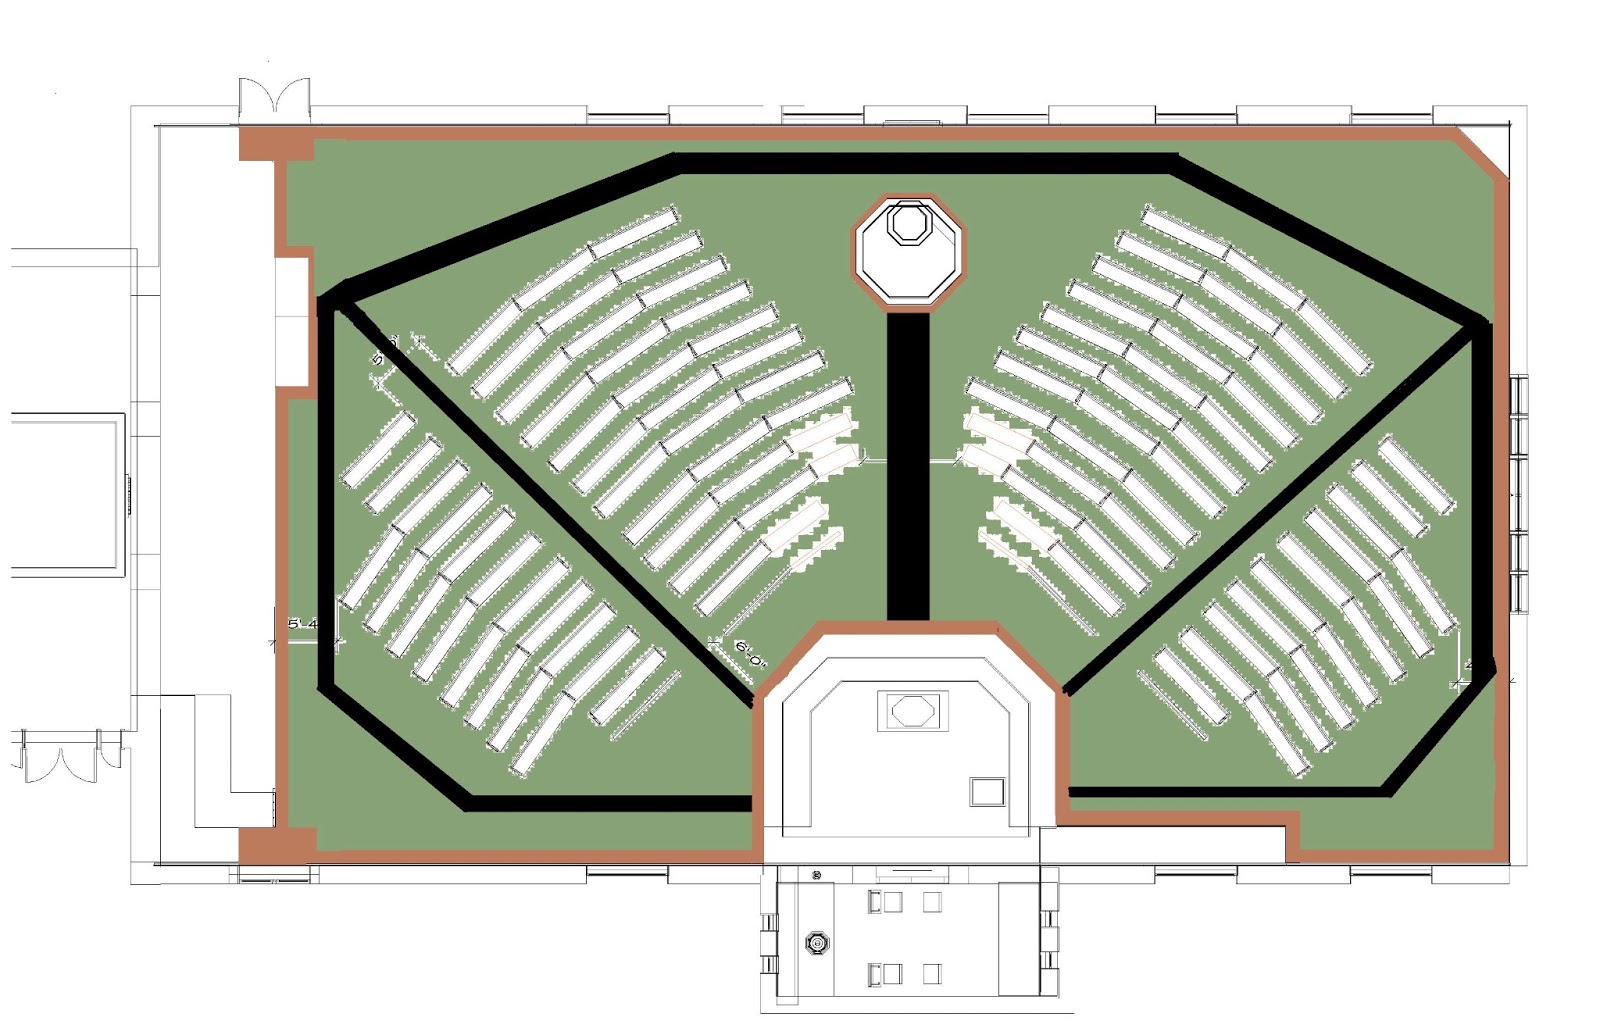 Traditional Church Layout